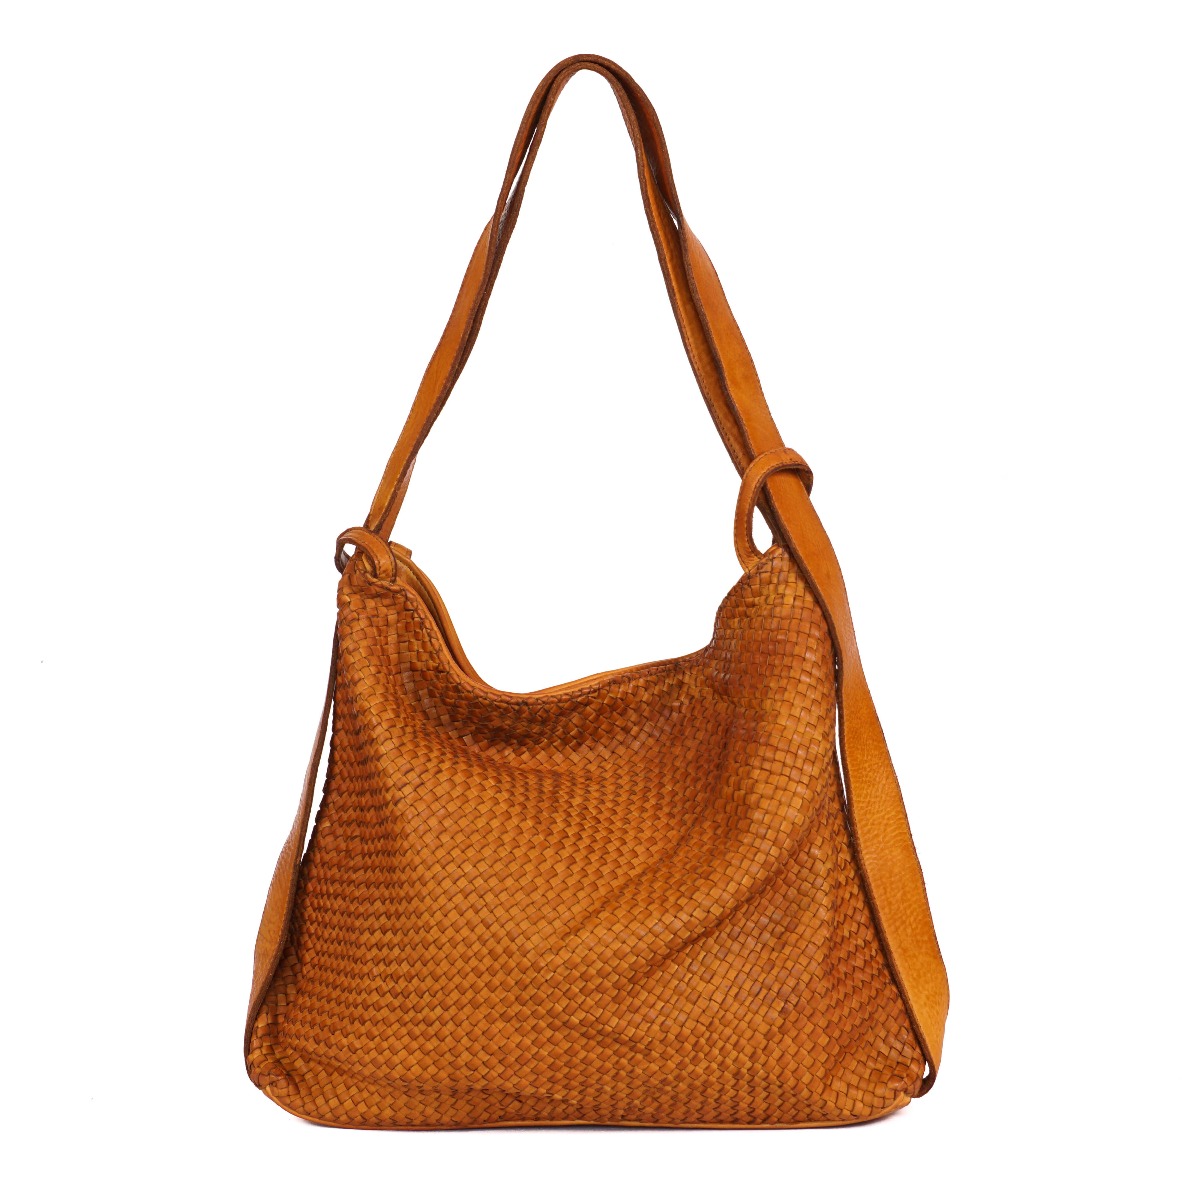 Vintage woven leather hobo bag and backpack